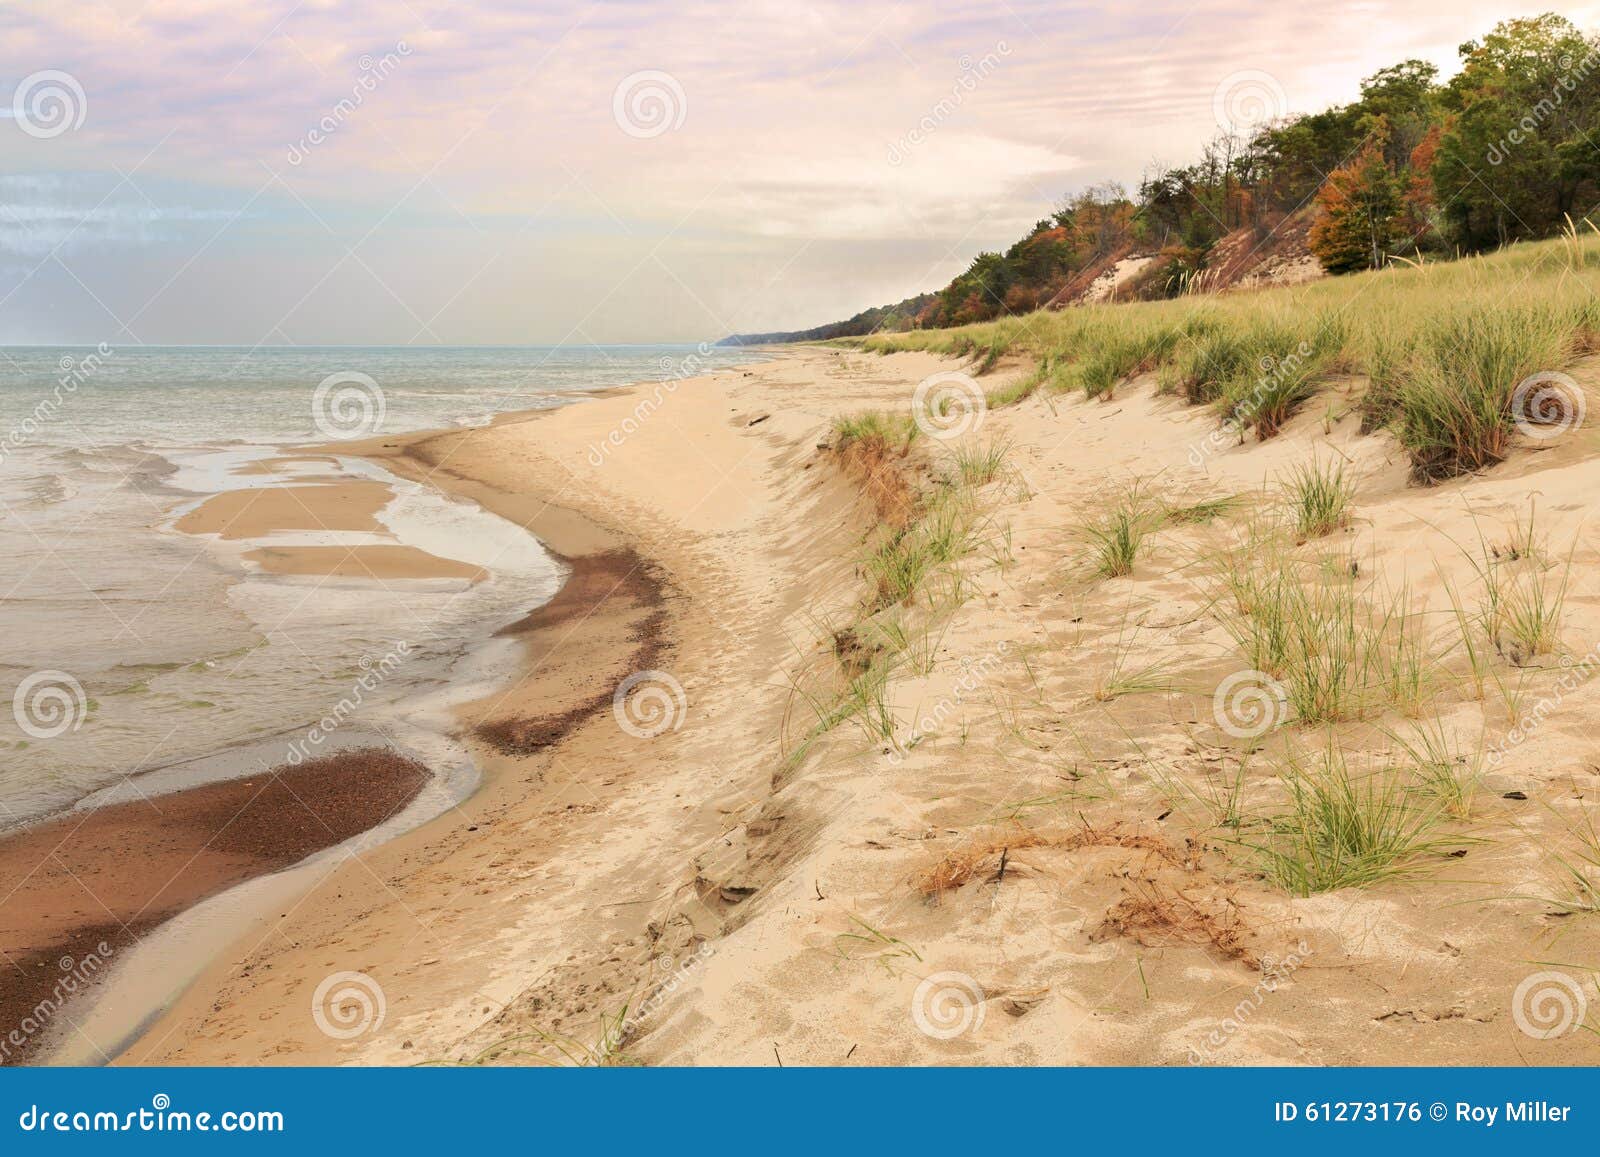 indiana dunes in the fall